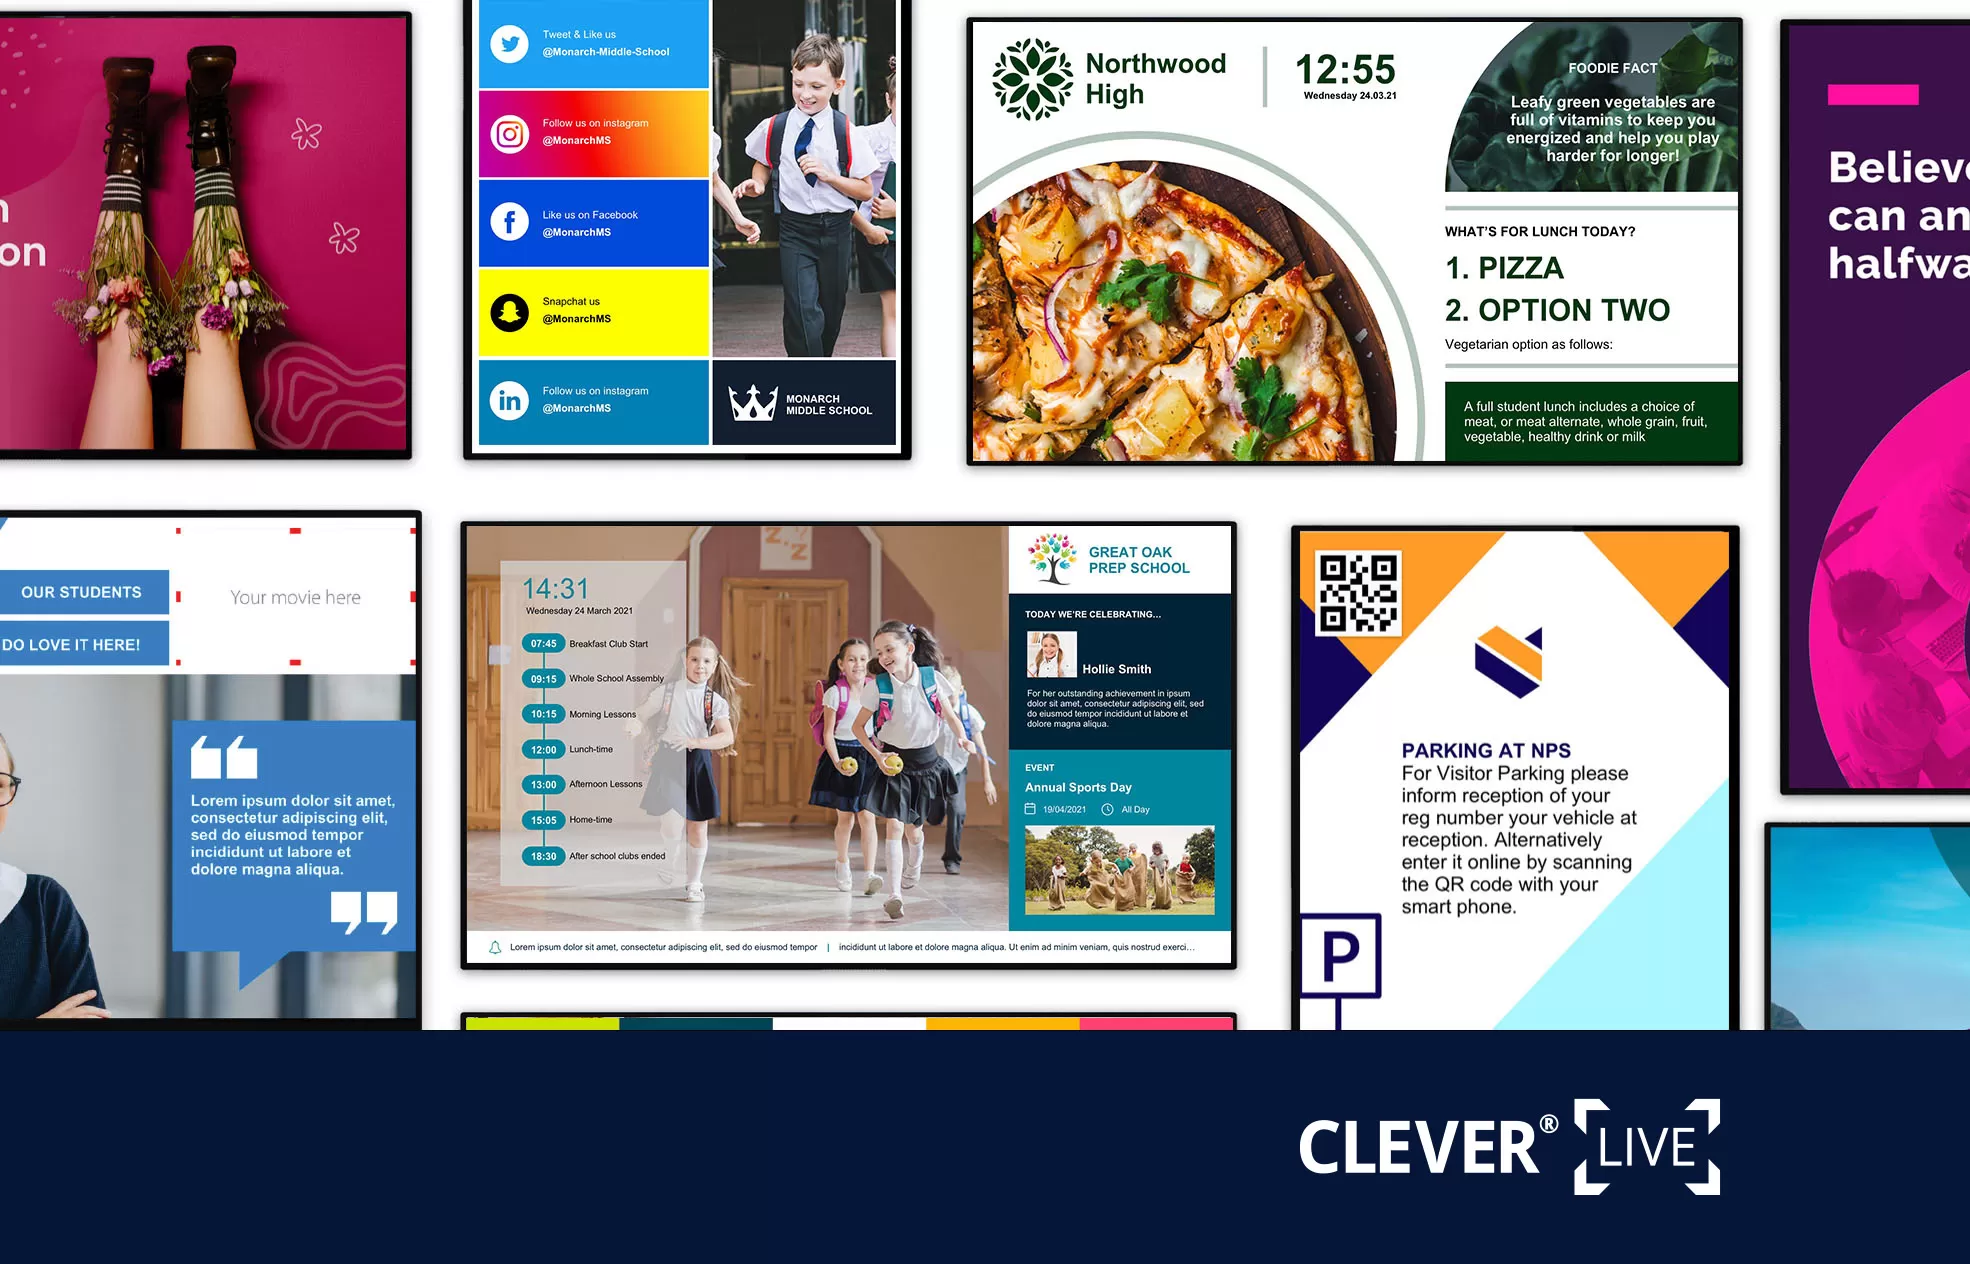 examples of digital displays arranged in a mozaic with 'cleverLive' in a blue banner across the bottom